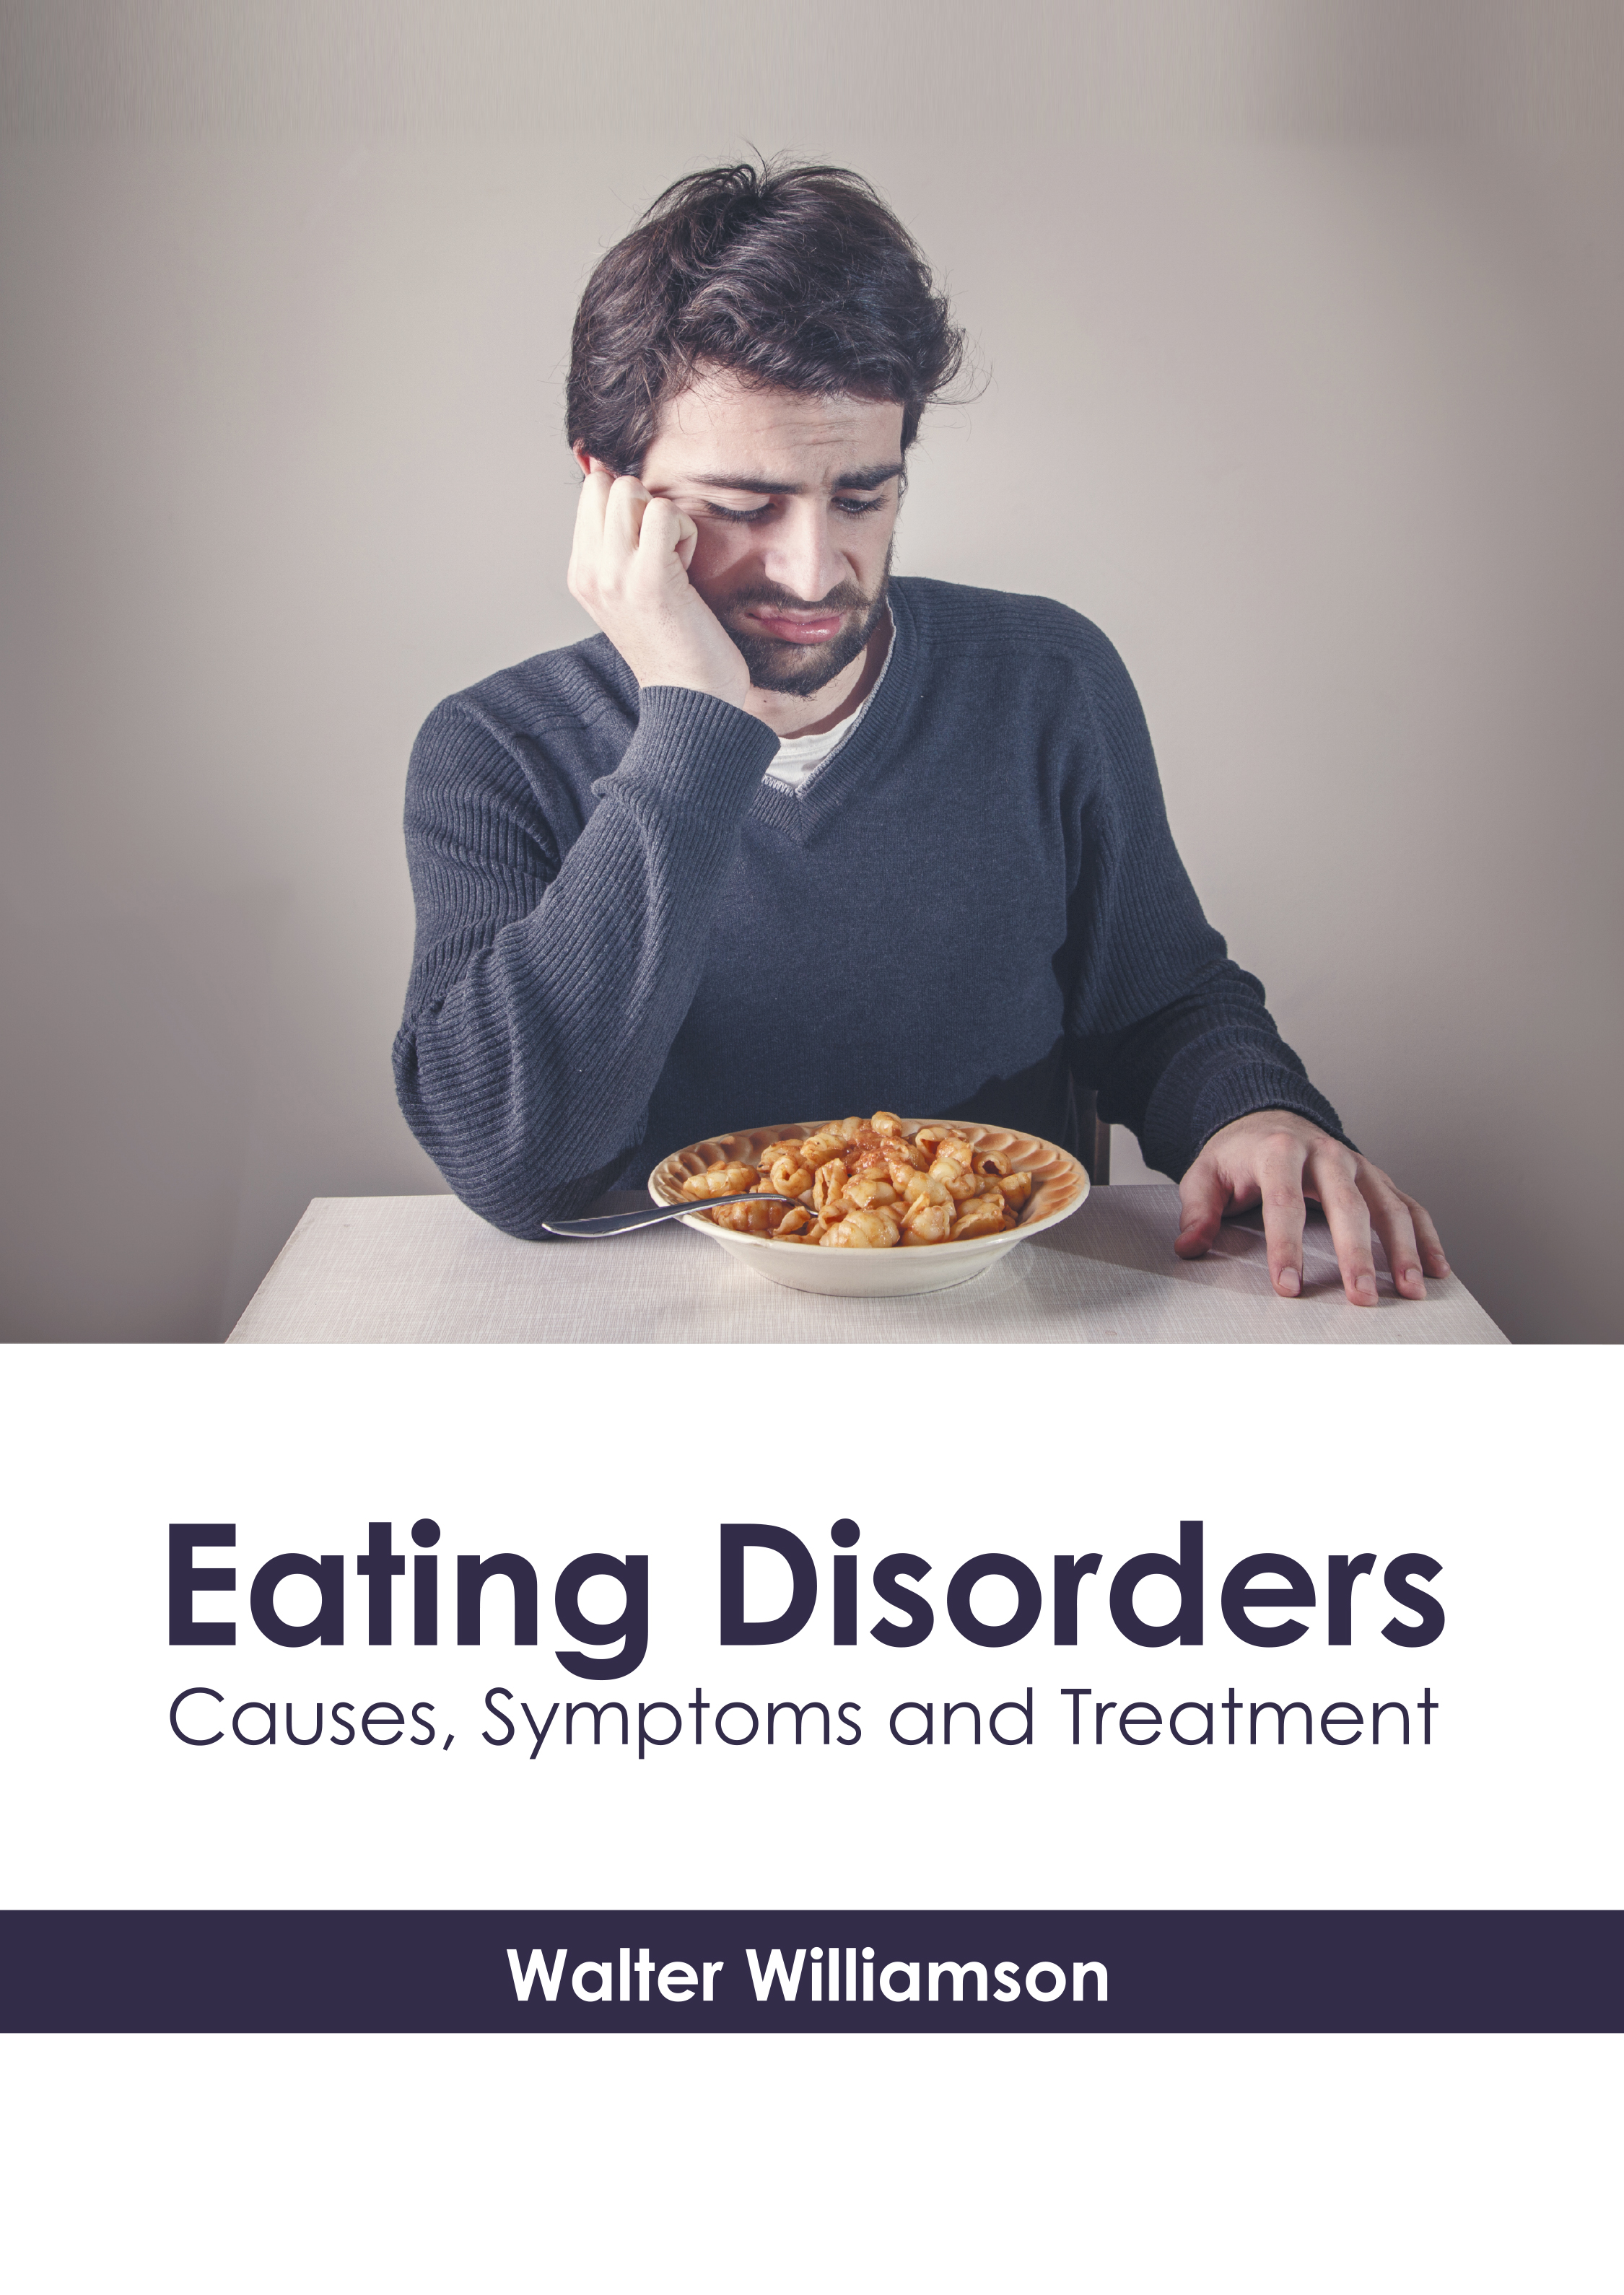 EATING DISORDERS: CAUSES, SYMPTOMS AND TREATMENT | ISBN: 9781639270927